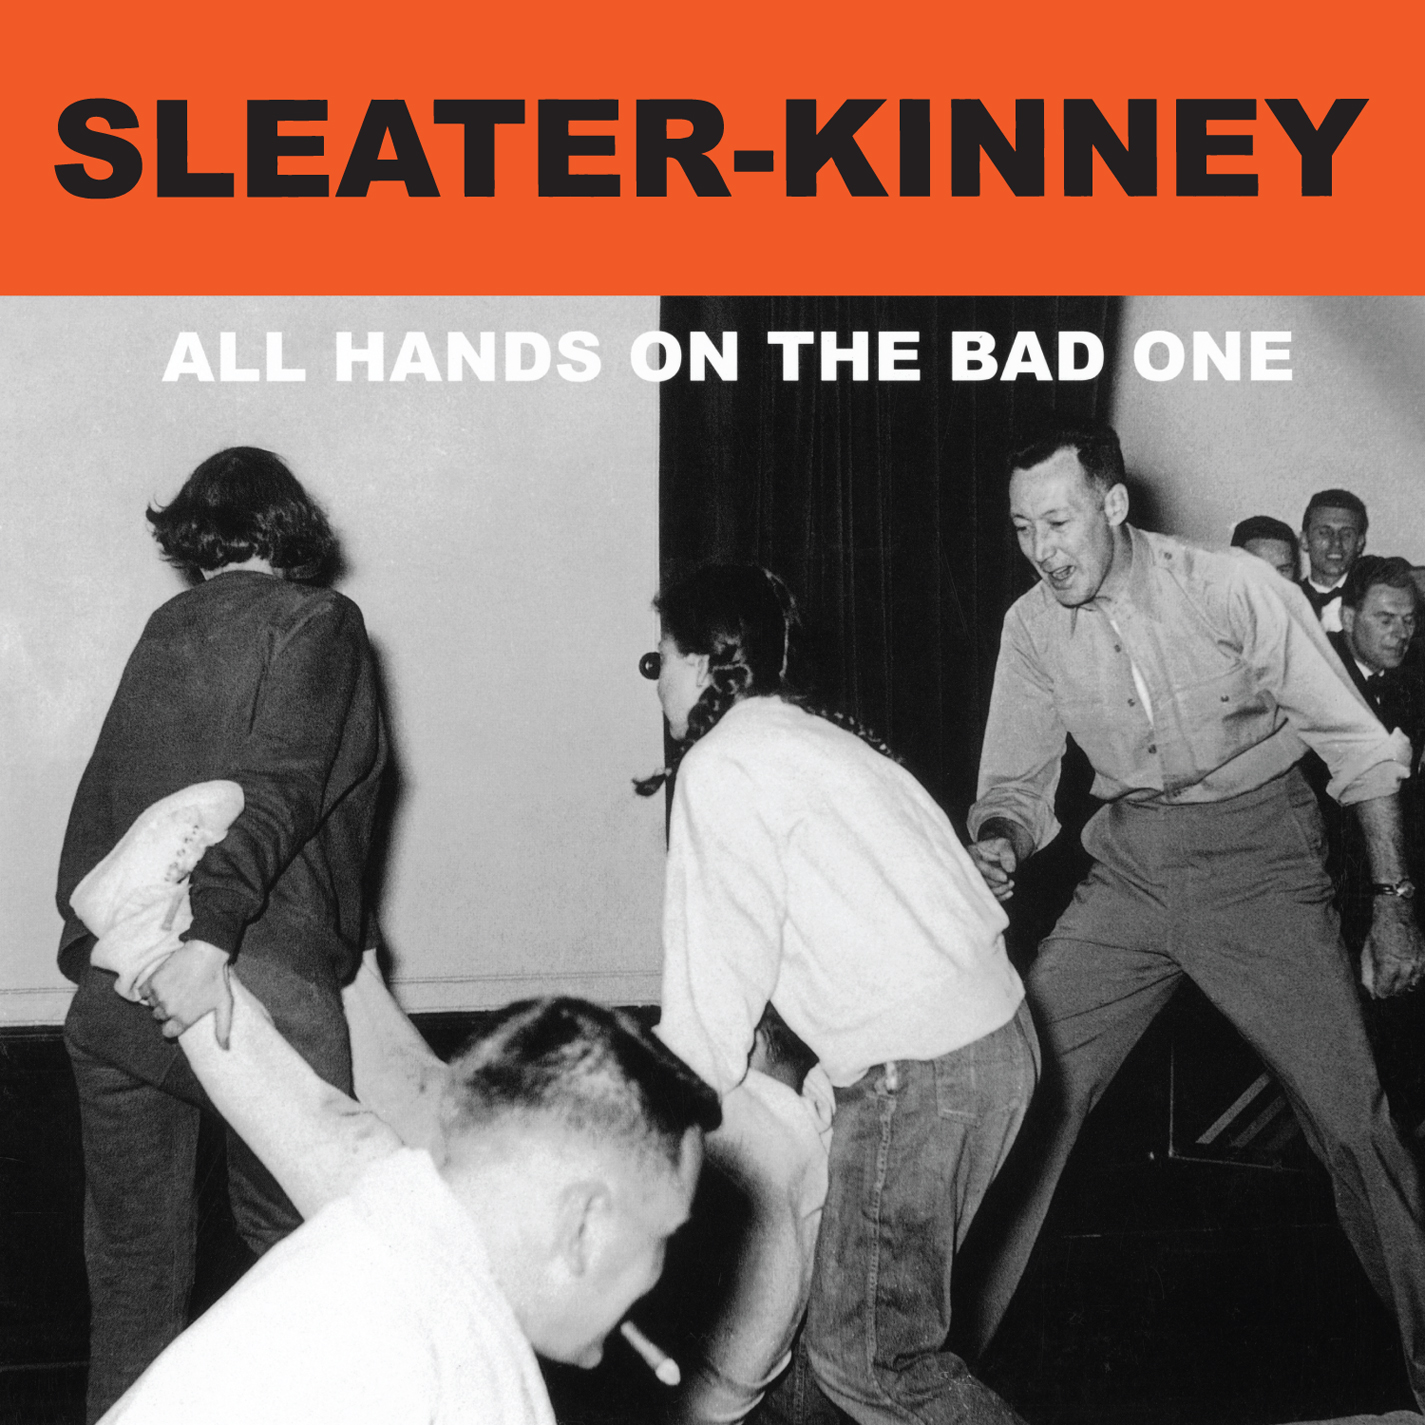 Sleater-Kinney - All Hands on the Bad One - CD